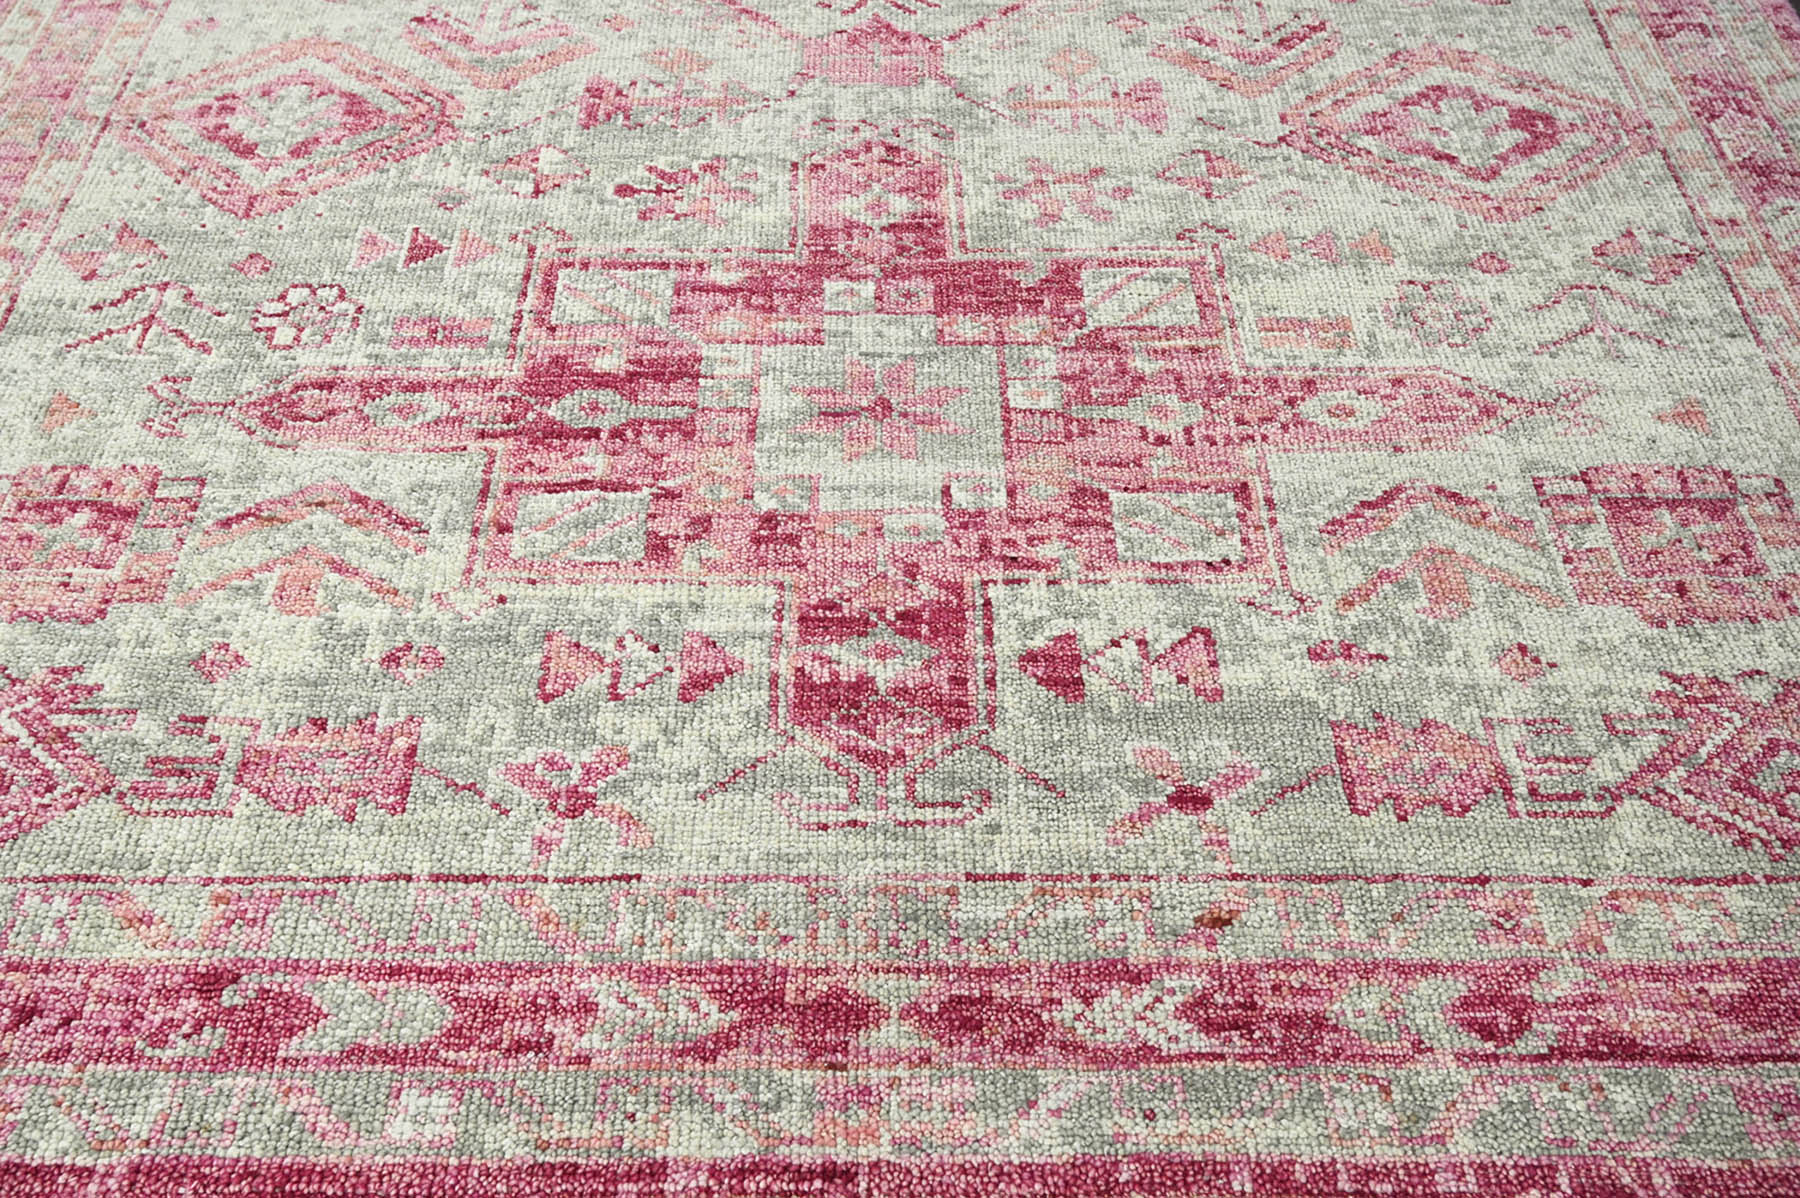 Multi Size Pink, Gray Hand Knotted Arts & Crafts 100% Wool Turkish Oushak Traditional Oriental Area Rug